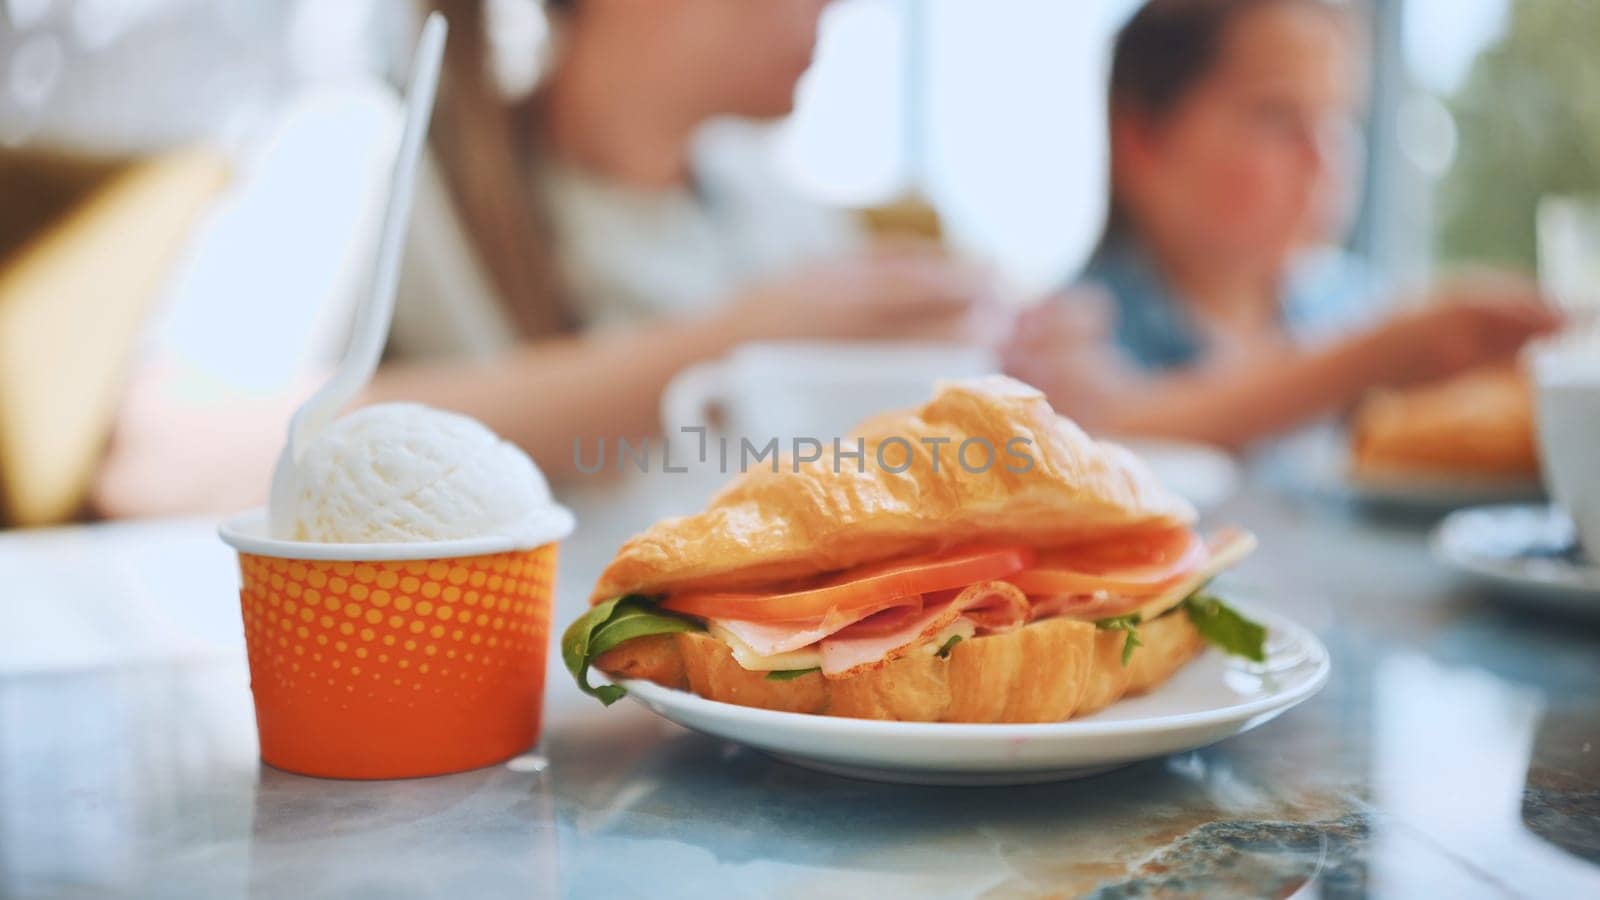 Ice cream and croissant with meat against the background of people eating in the cafe. by DovidPro